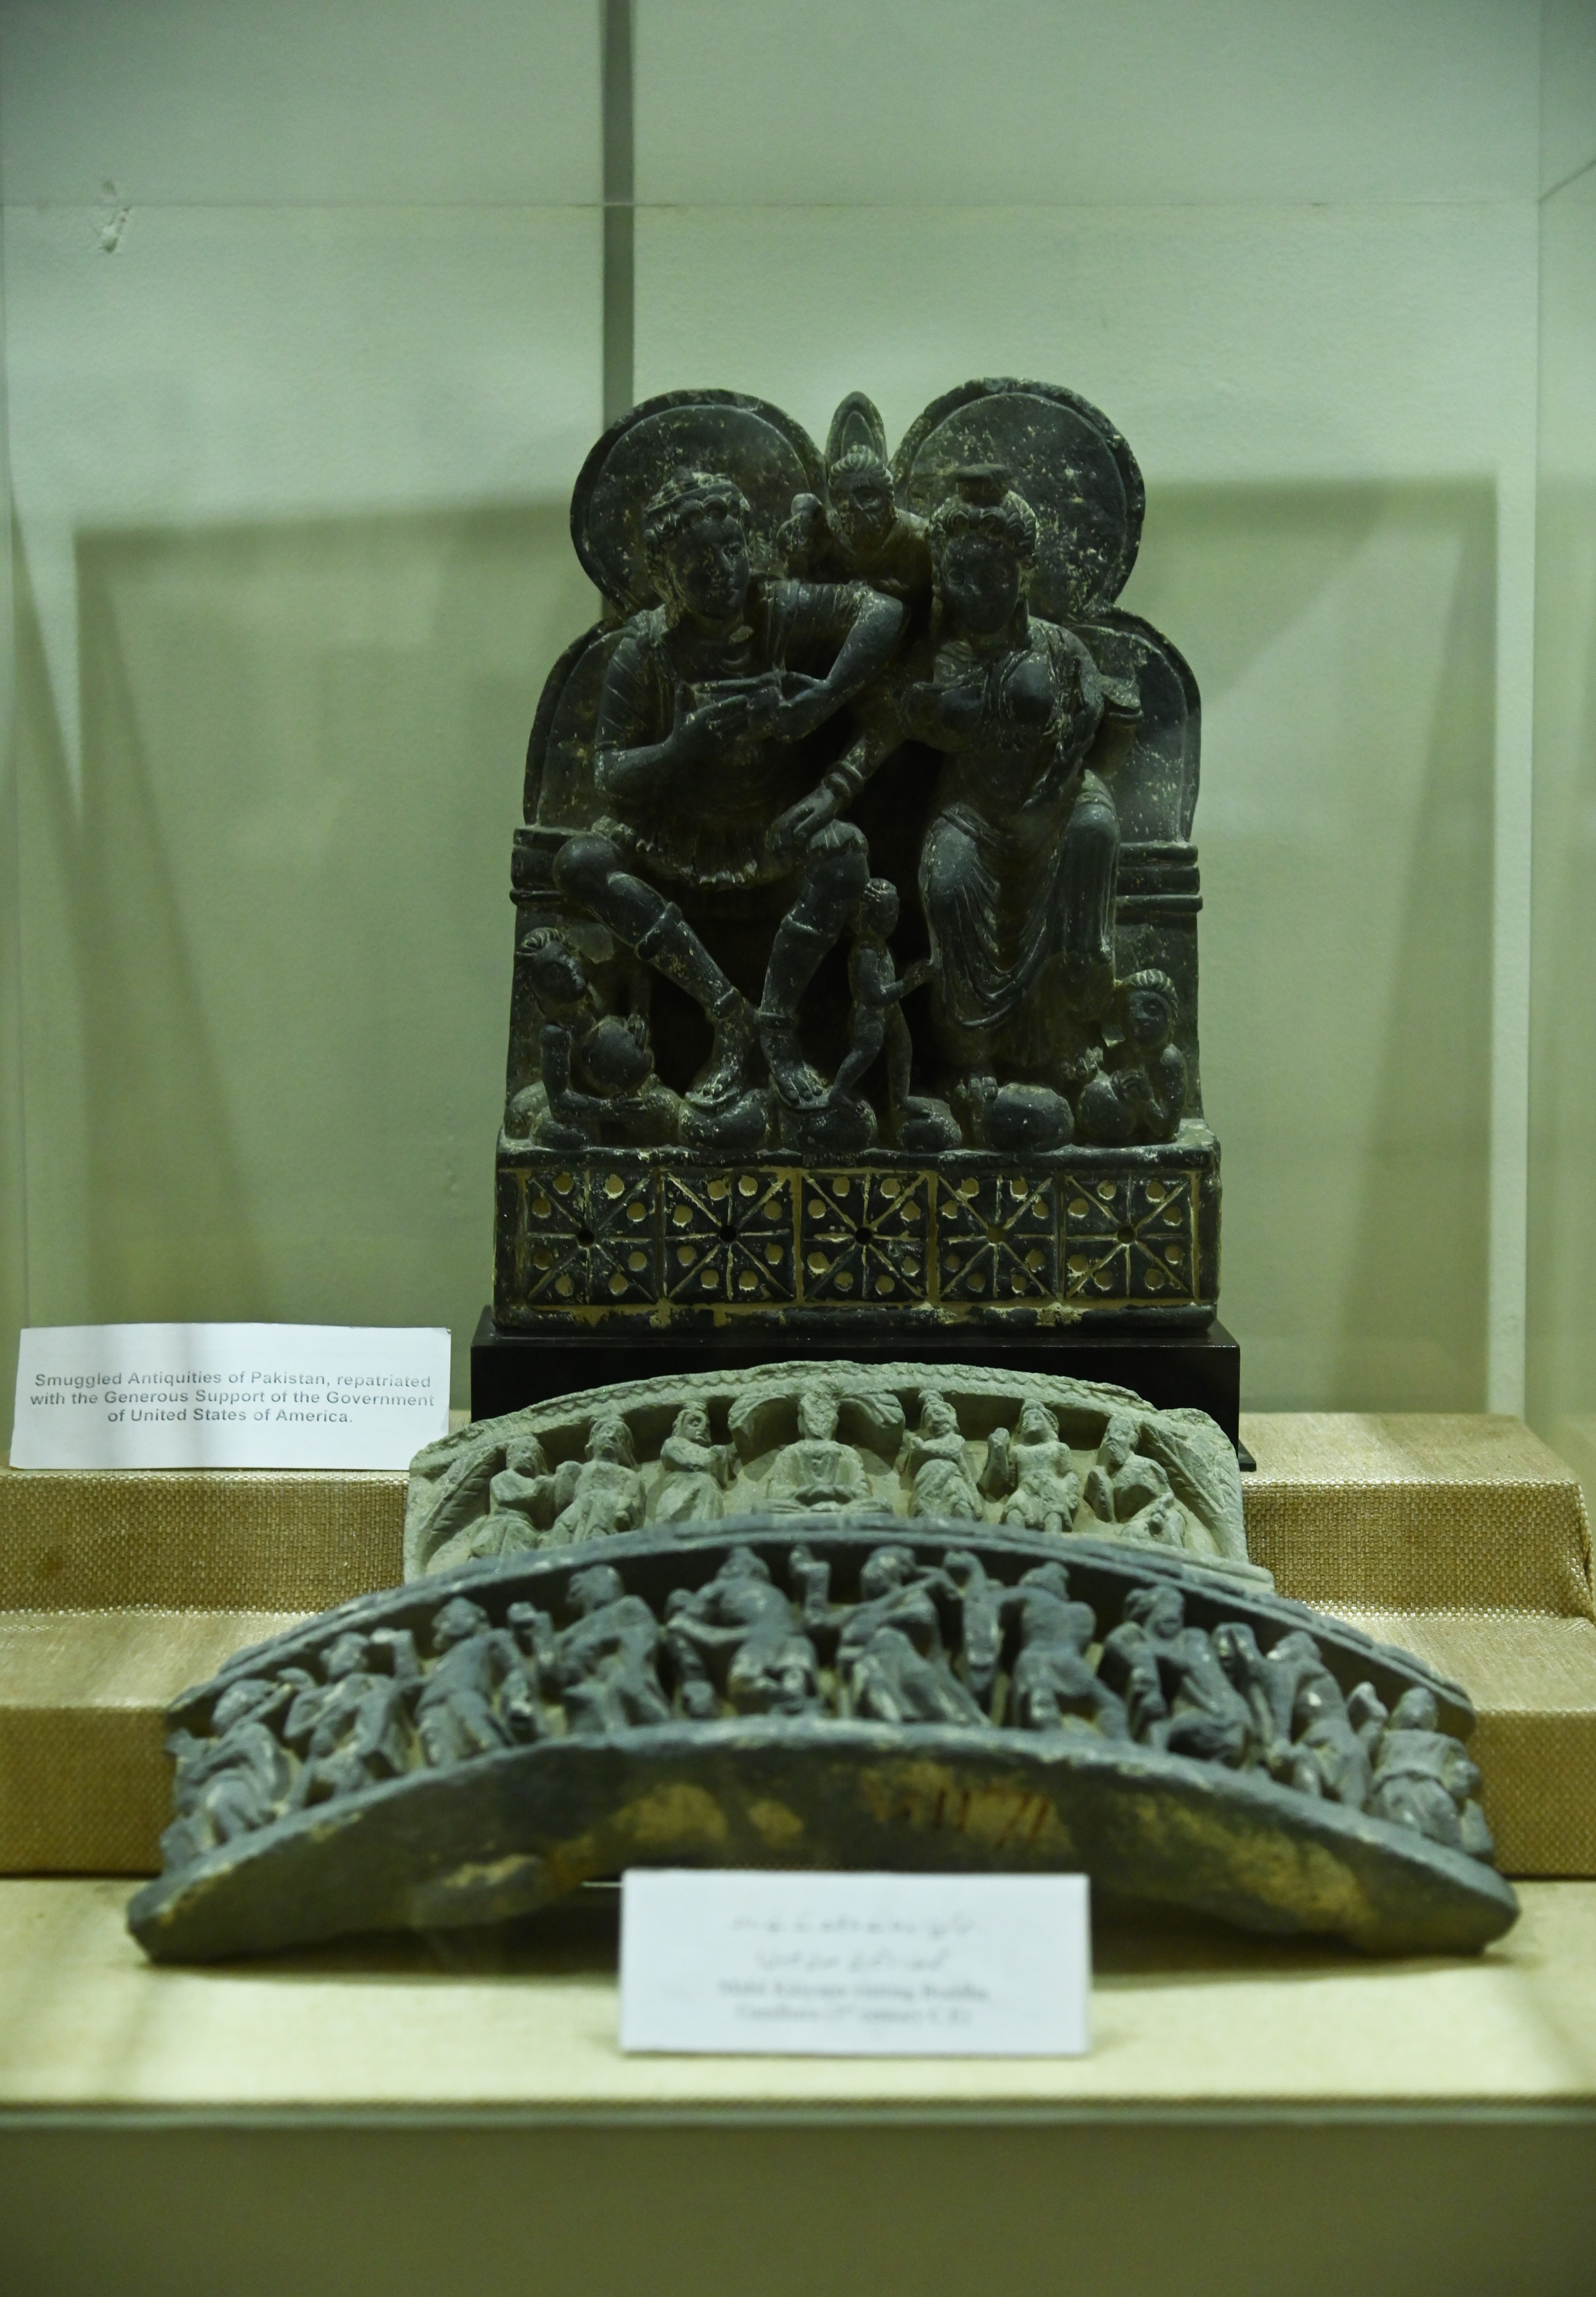 The Smuggled Antiques of Pakistan displayed at the Sir Syed Memorial Museum, symbolizing the ancient Gandhara Culture